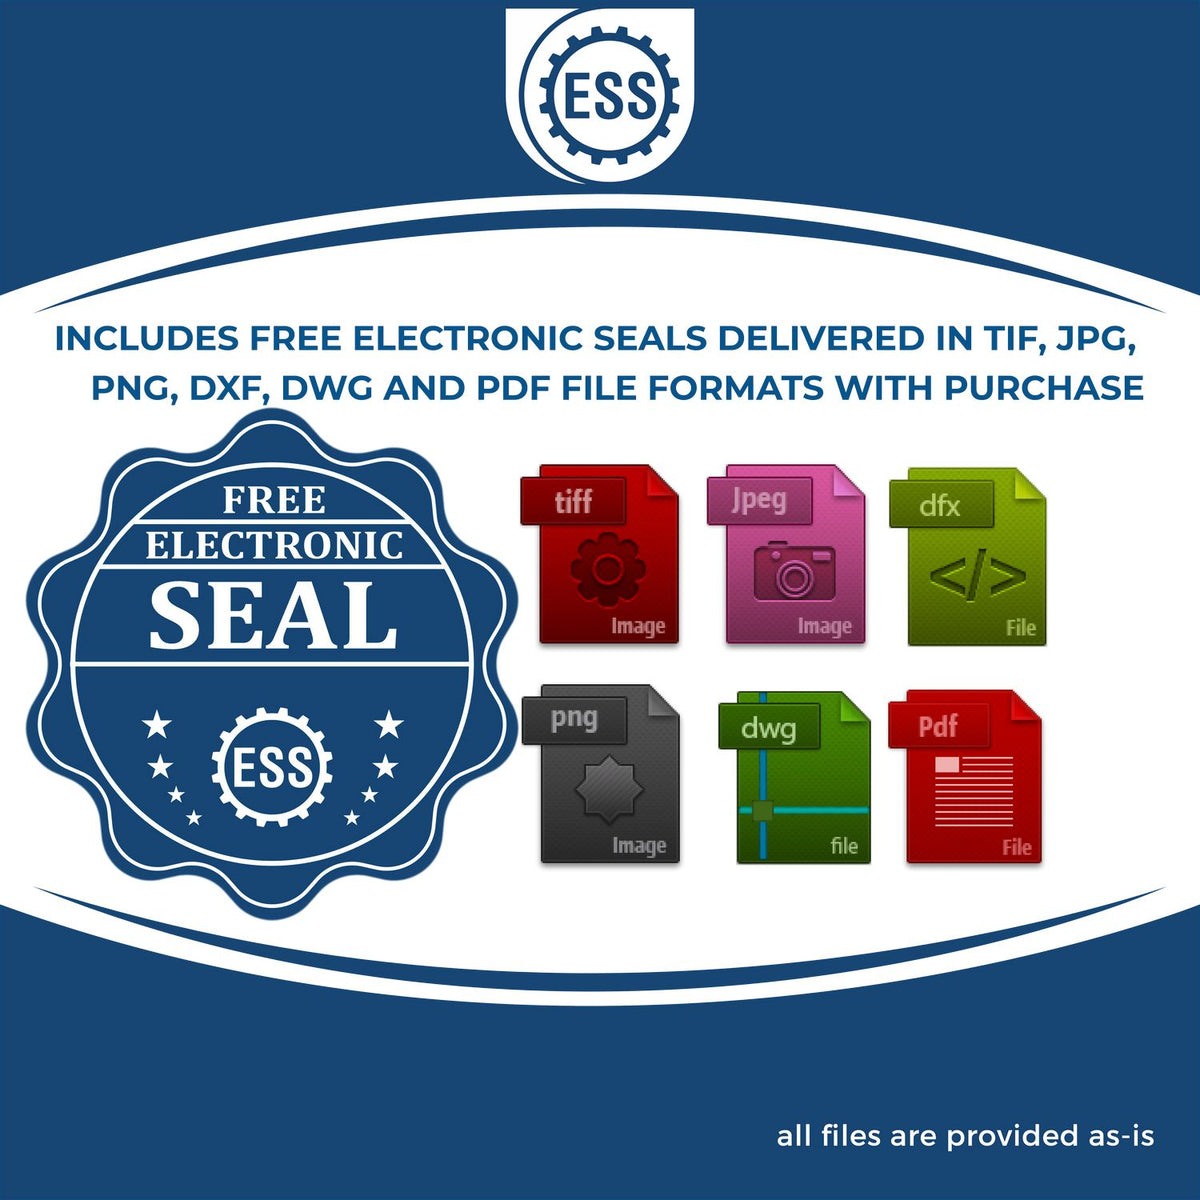 An infographic for the free electronic seal for the Vermont Desk Architect Embossing Seal illustrating the different file type icons such as DXF, DWG, TIF, JPG and PNG.